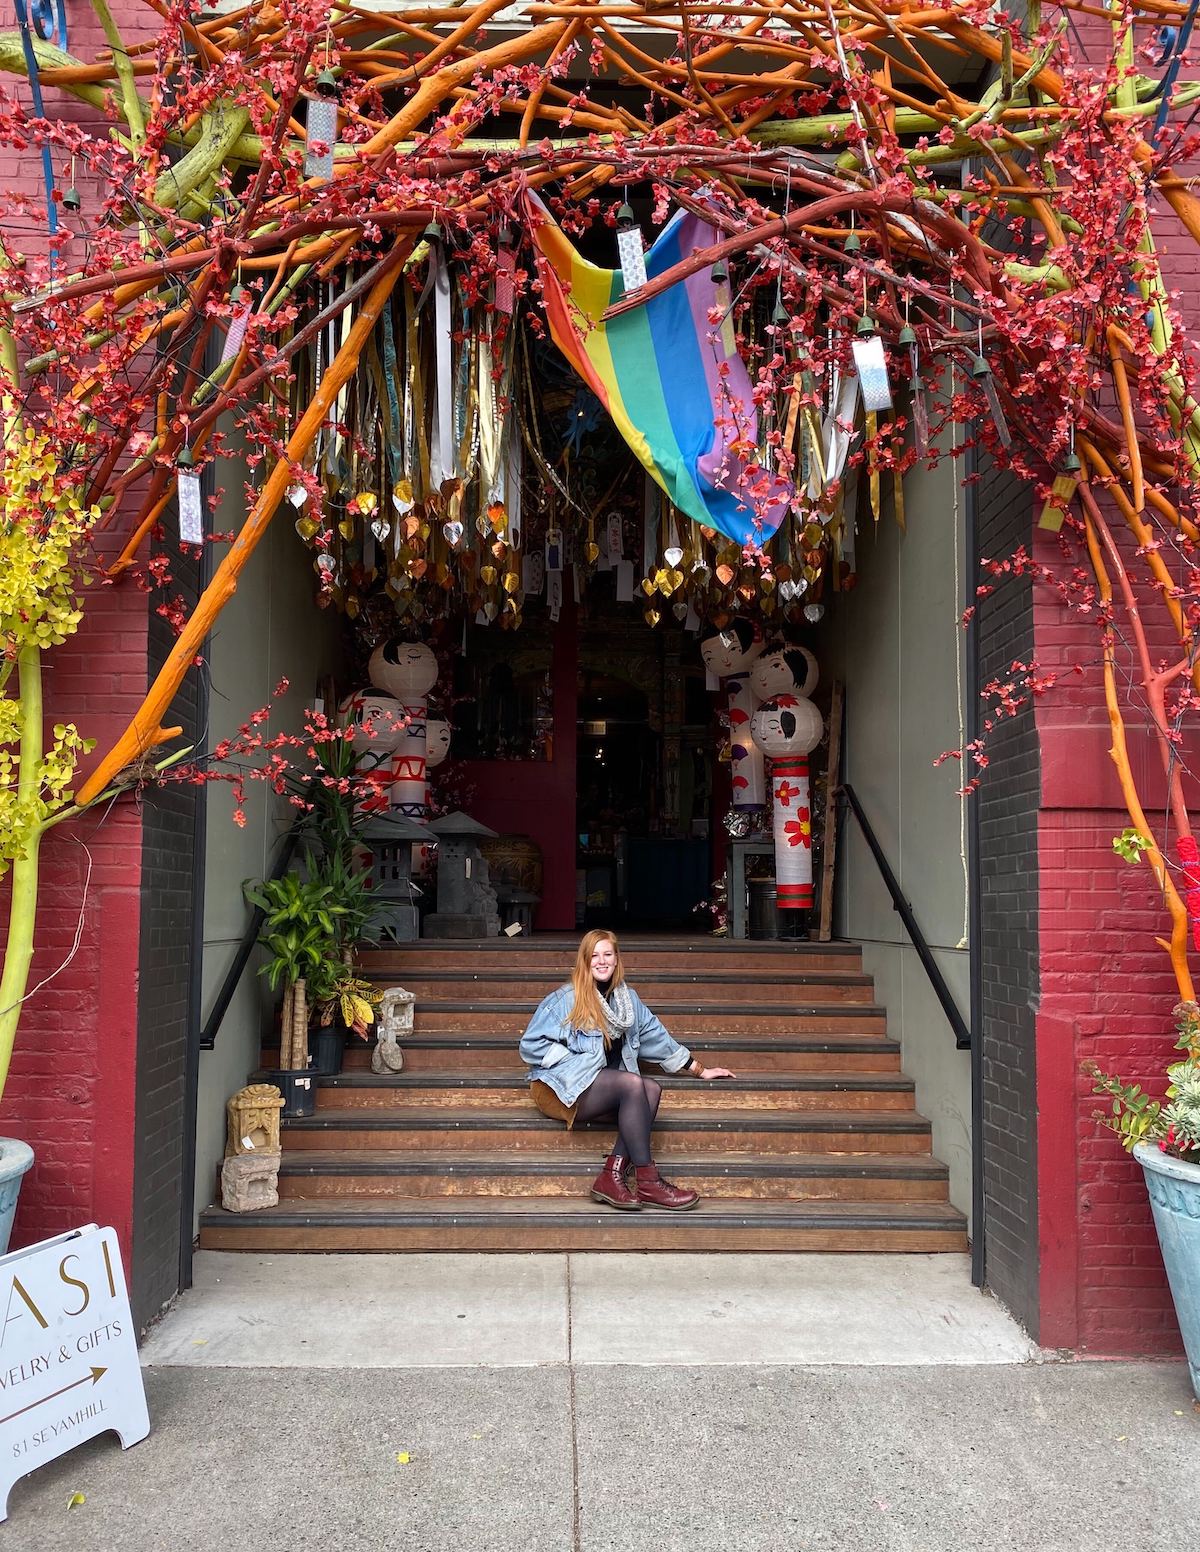 A woman on the stairs of a restaurant with an elaborate entrance